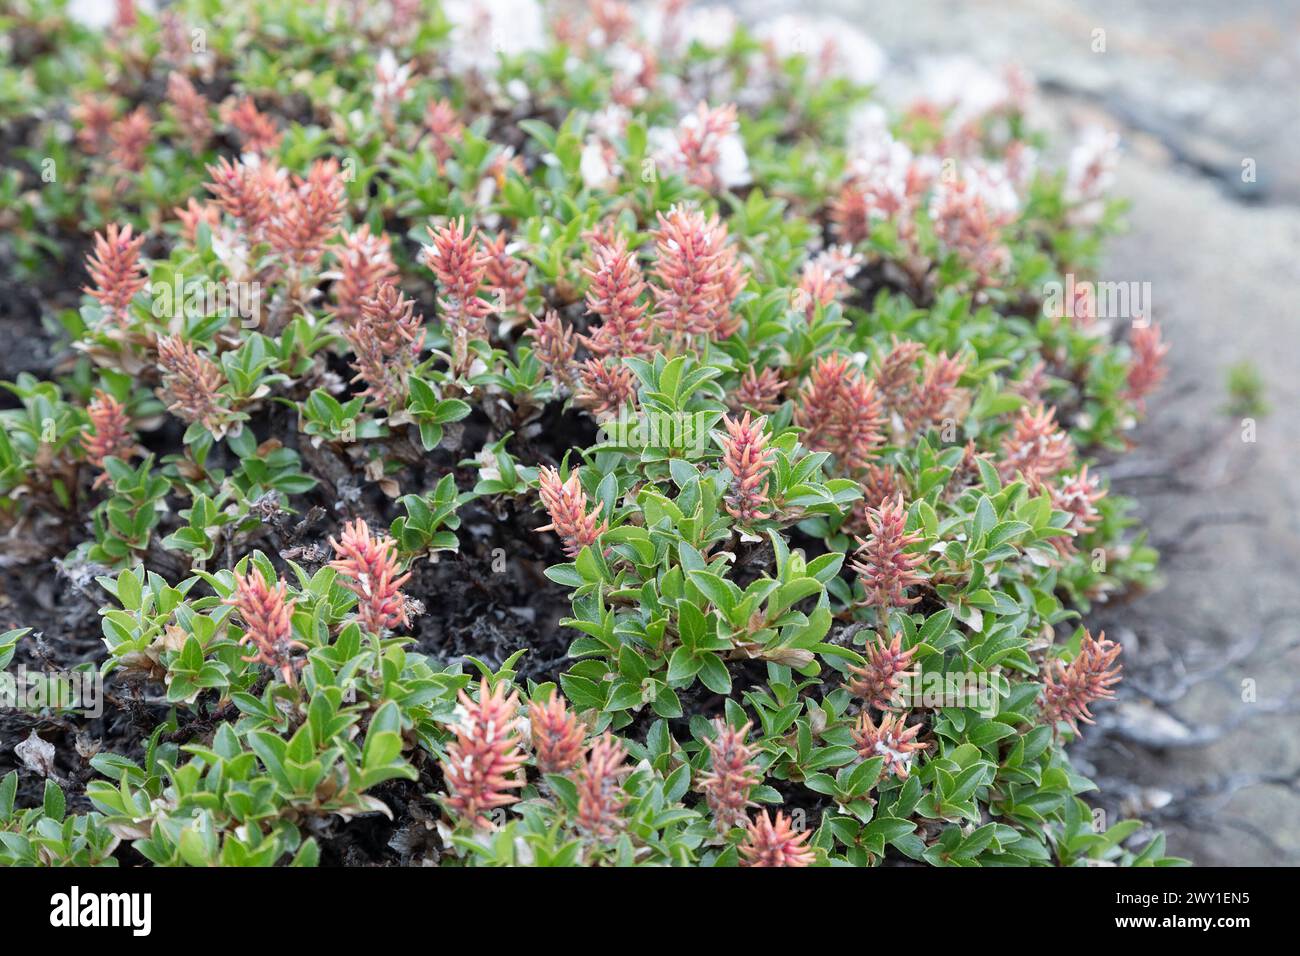 Dwarf willow growing on stones. Close-up Stock Photo